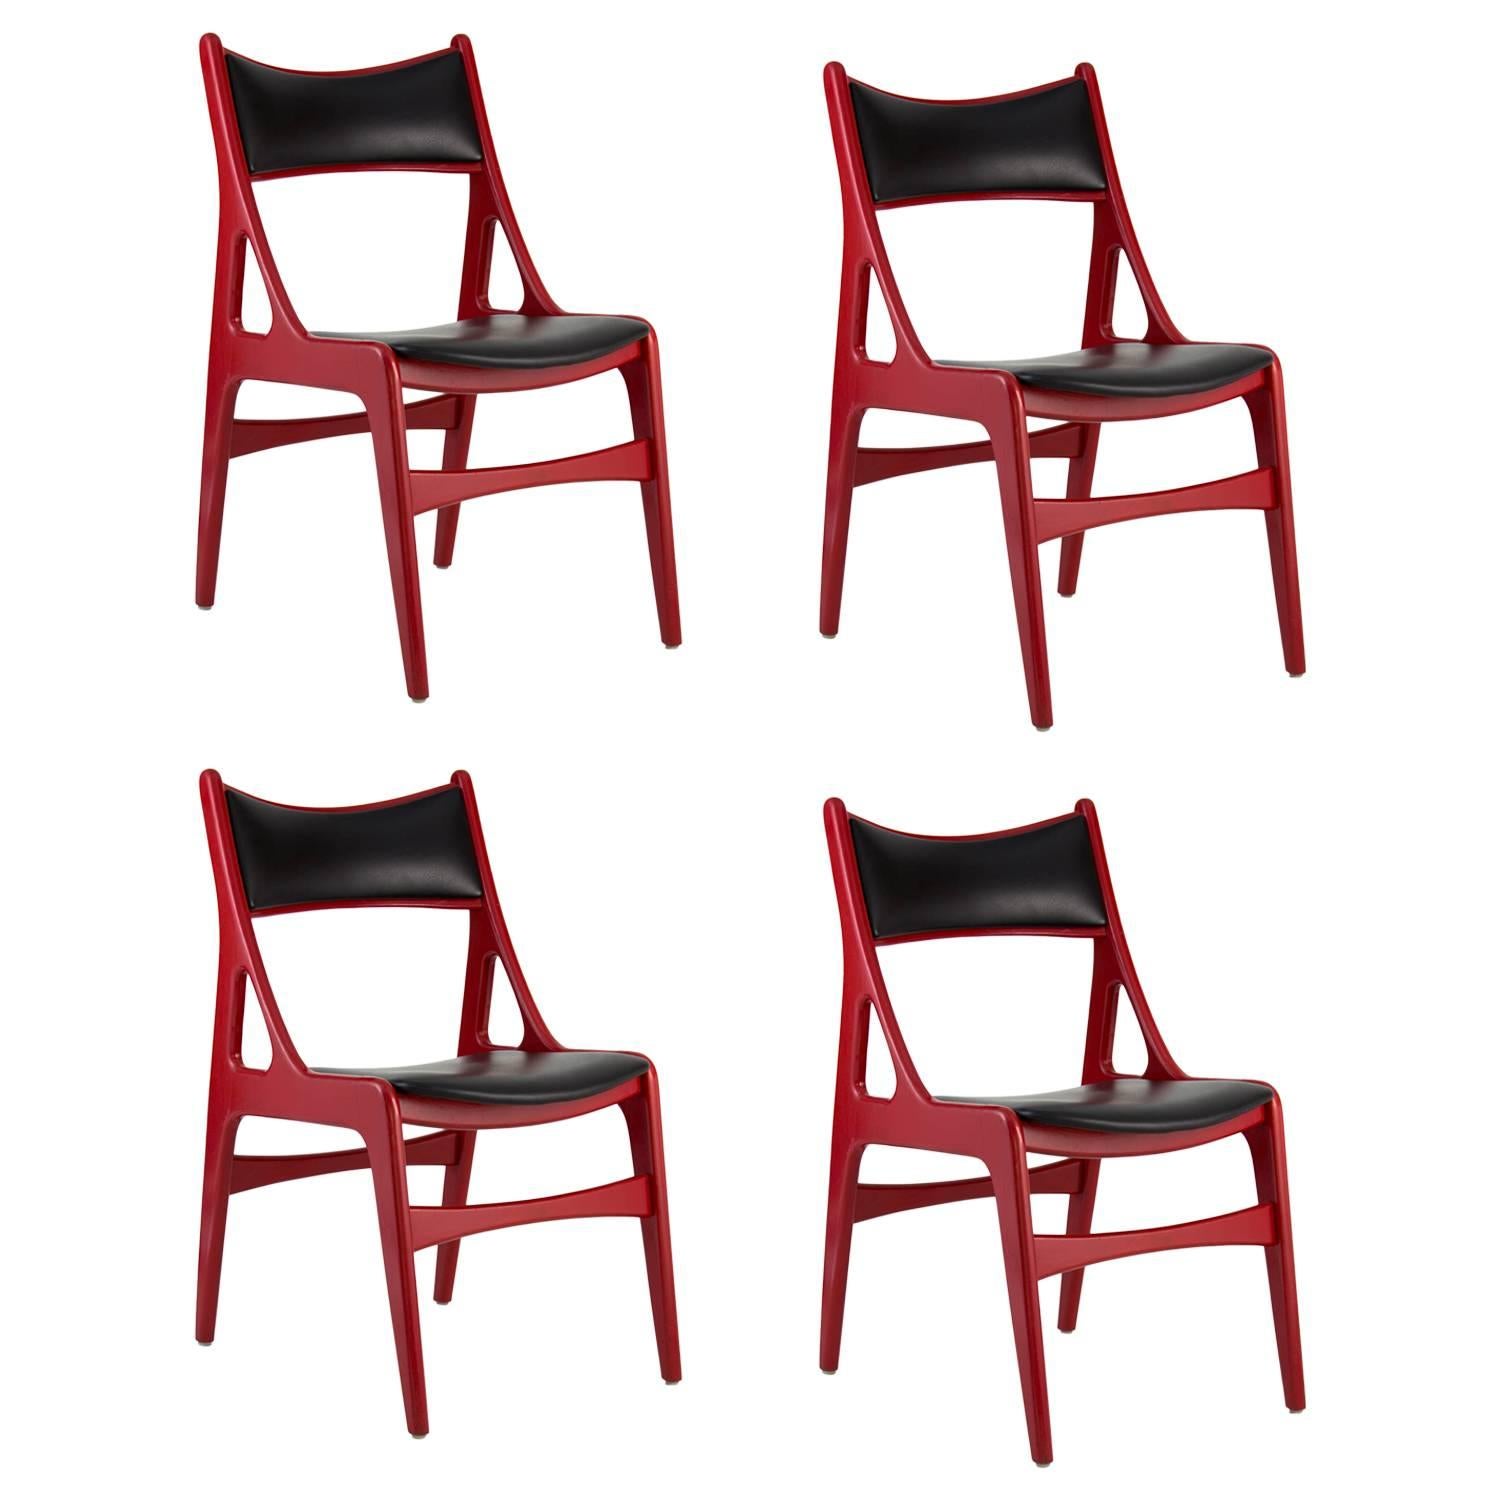 Set of Four, 20th Century Red Chairs with Black Vinyl Upholstery